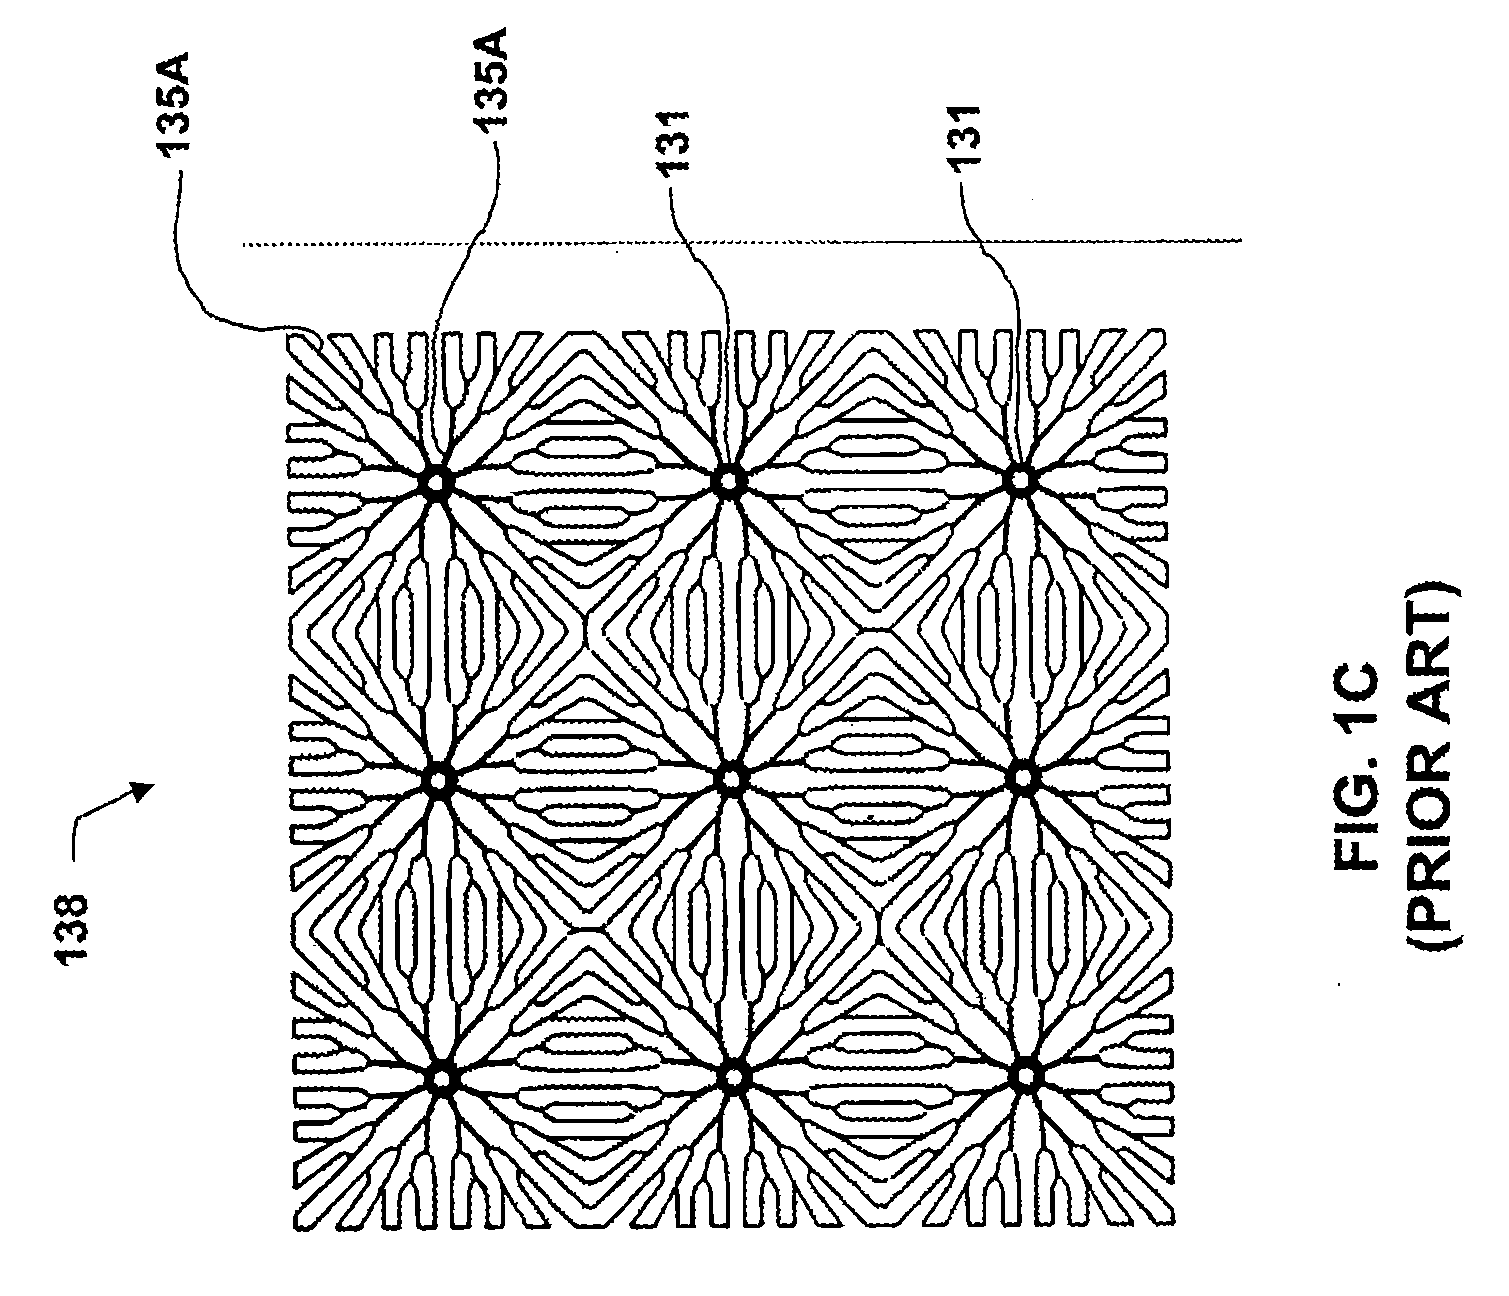 Selective electroless deposition for solar cells